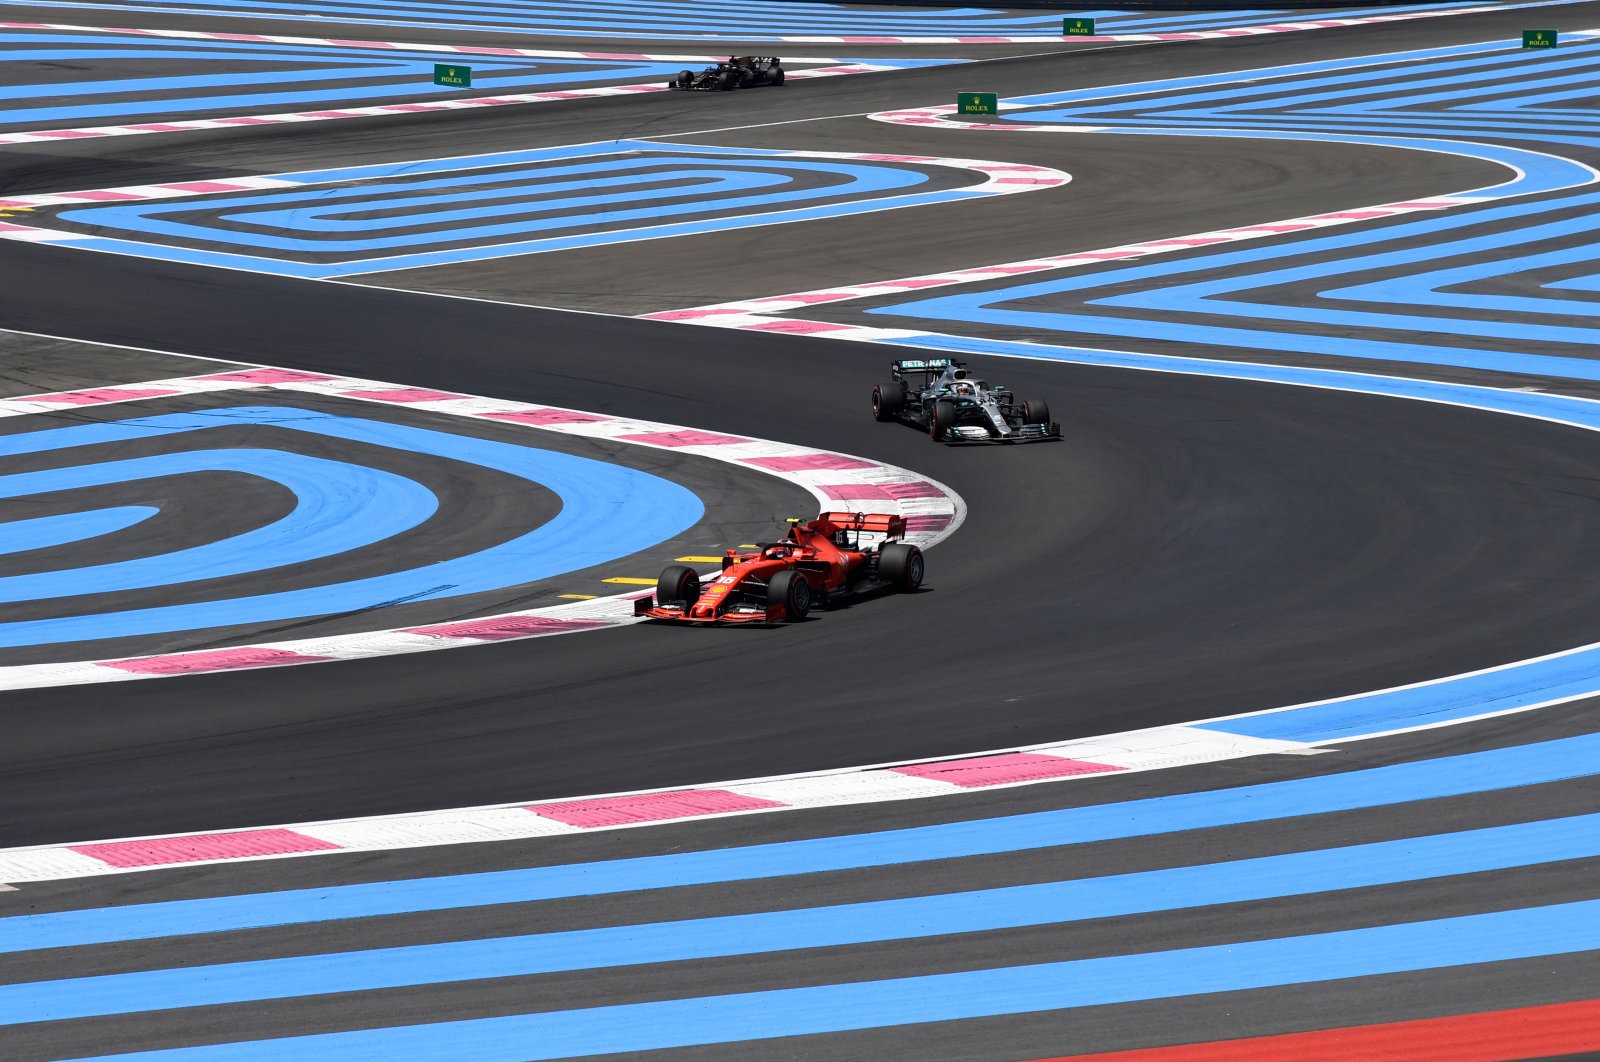 Ferrari's Charles Leclerc drives ahead of Mercedes' Lewis Hamilton during the third practice session at the Circuit Paul Ricard in Le Castellet, June 22, 2019. (AFP Photo)